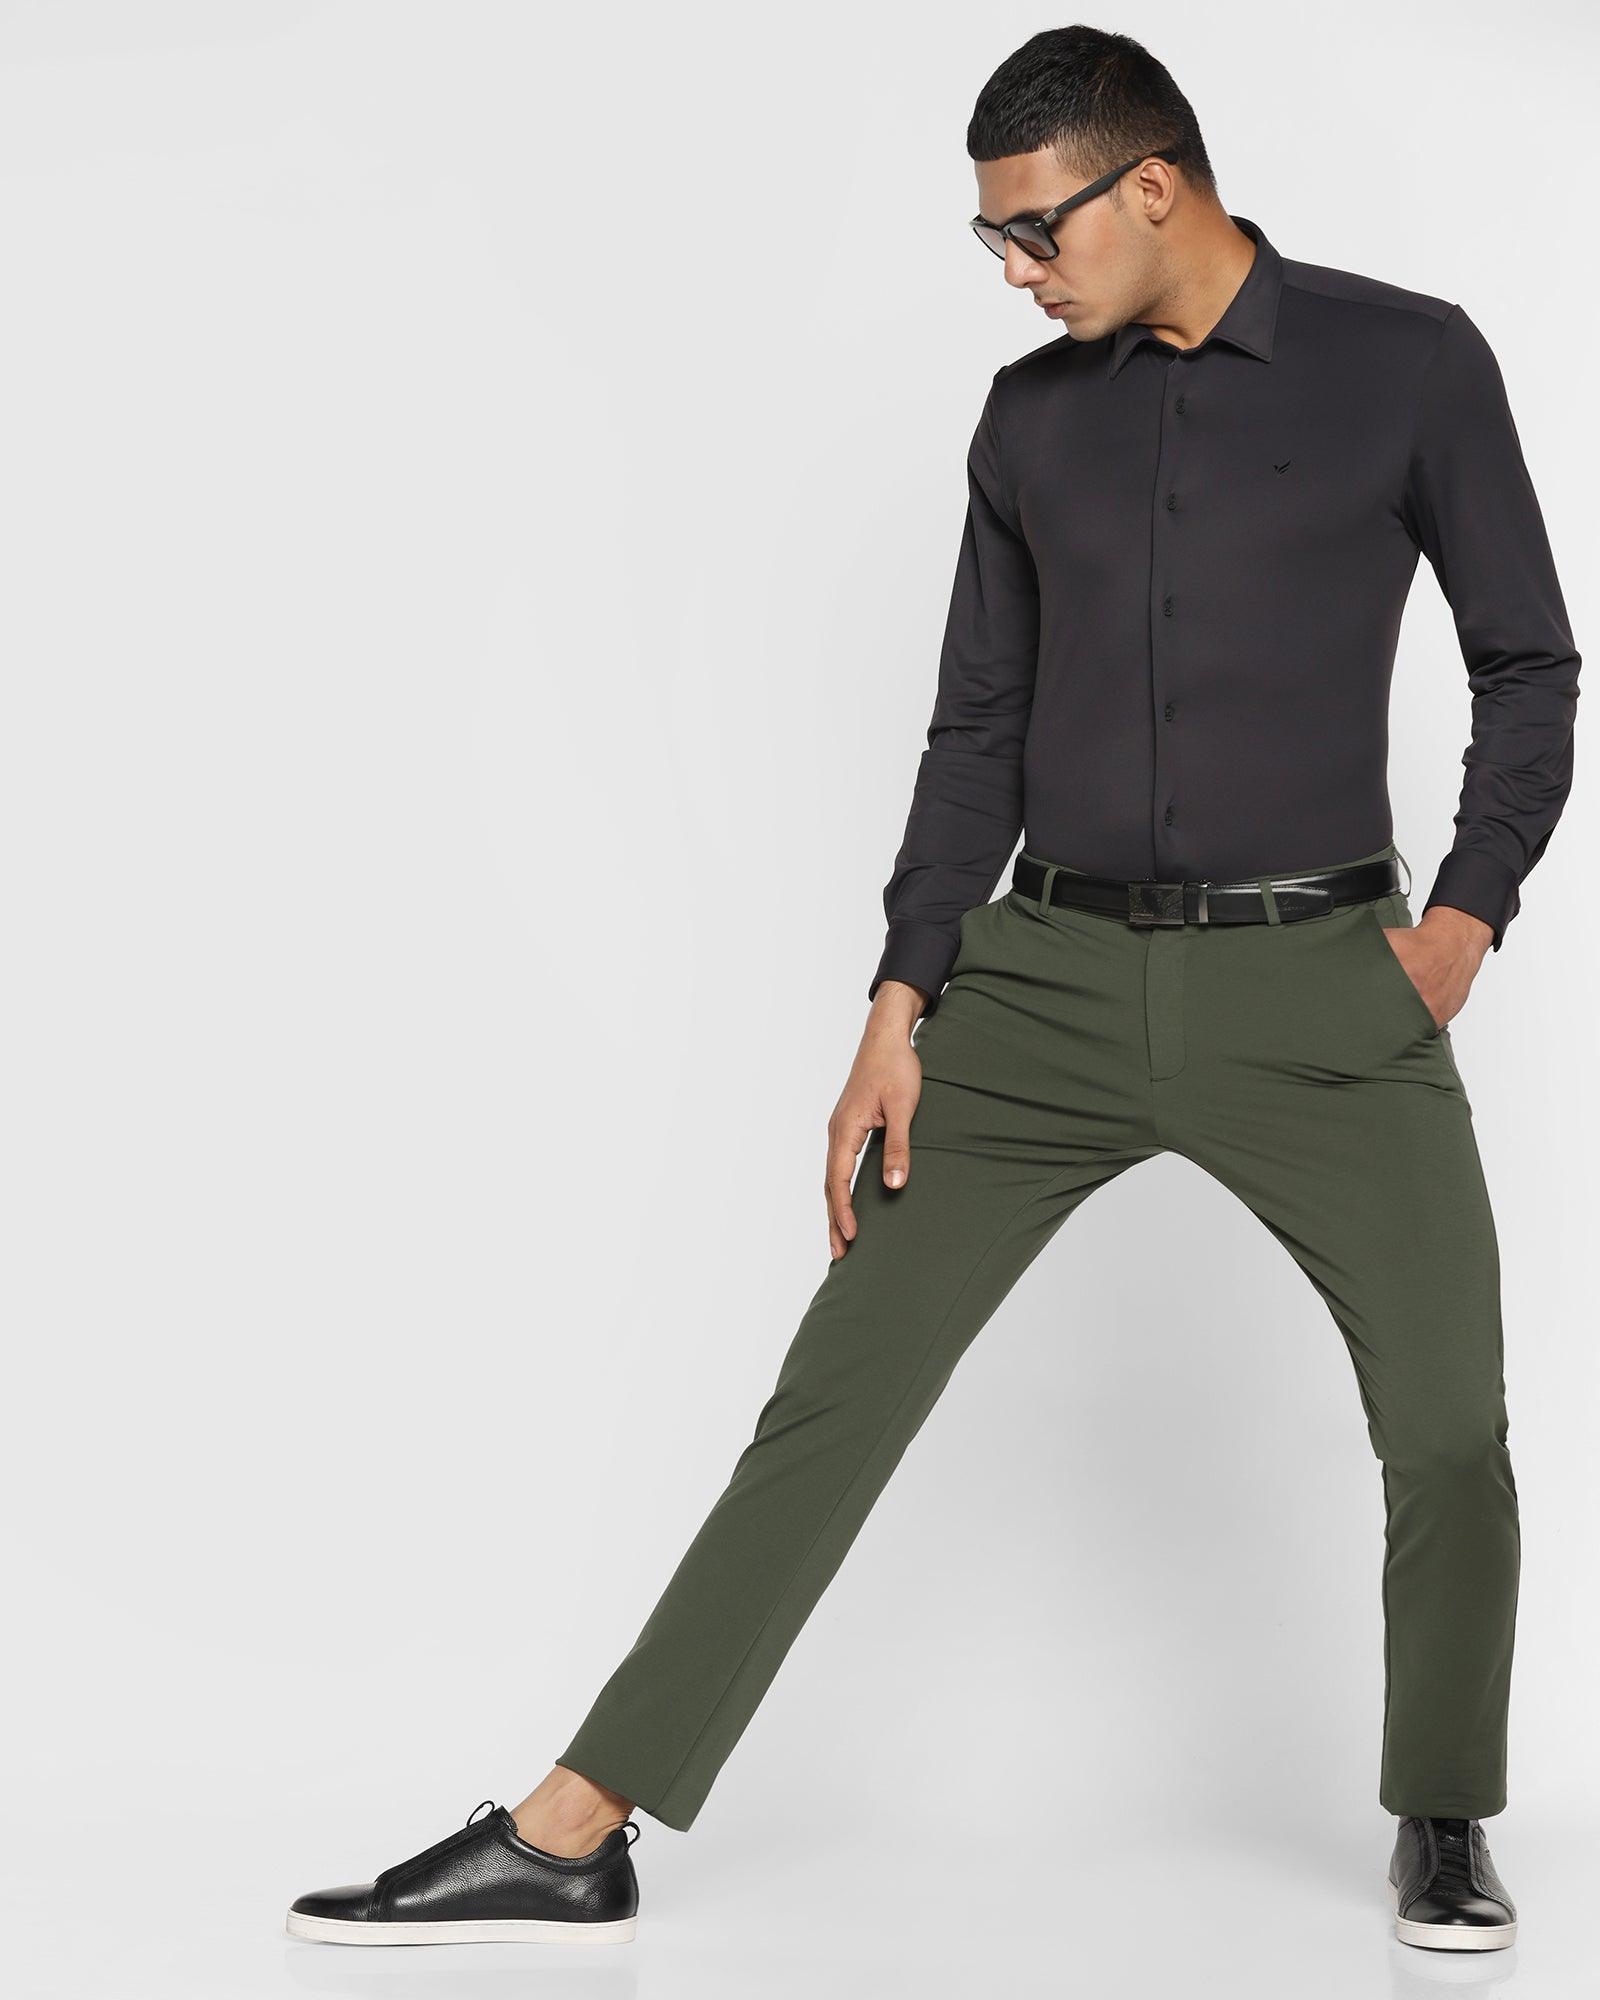 Dark Olive Green Cargo Pants  English Colours